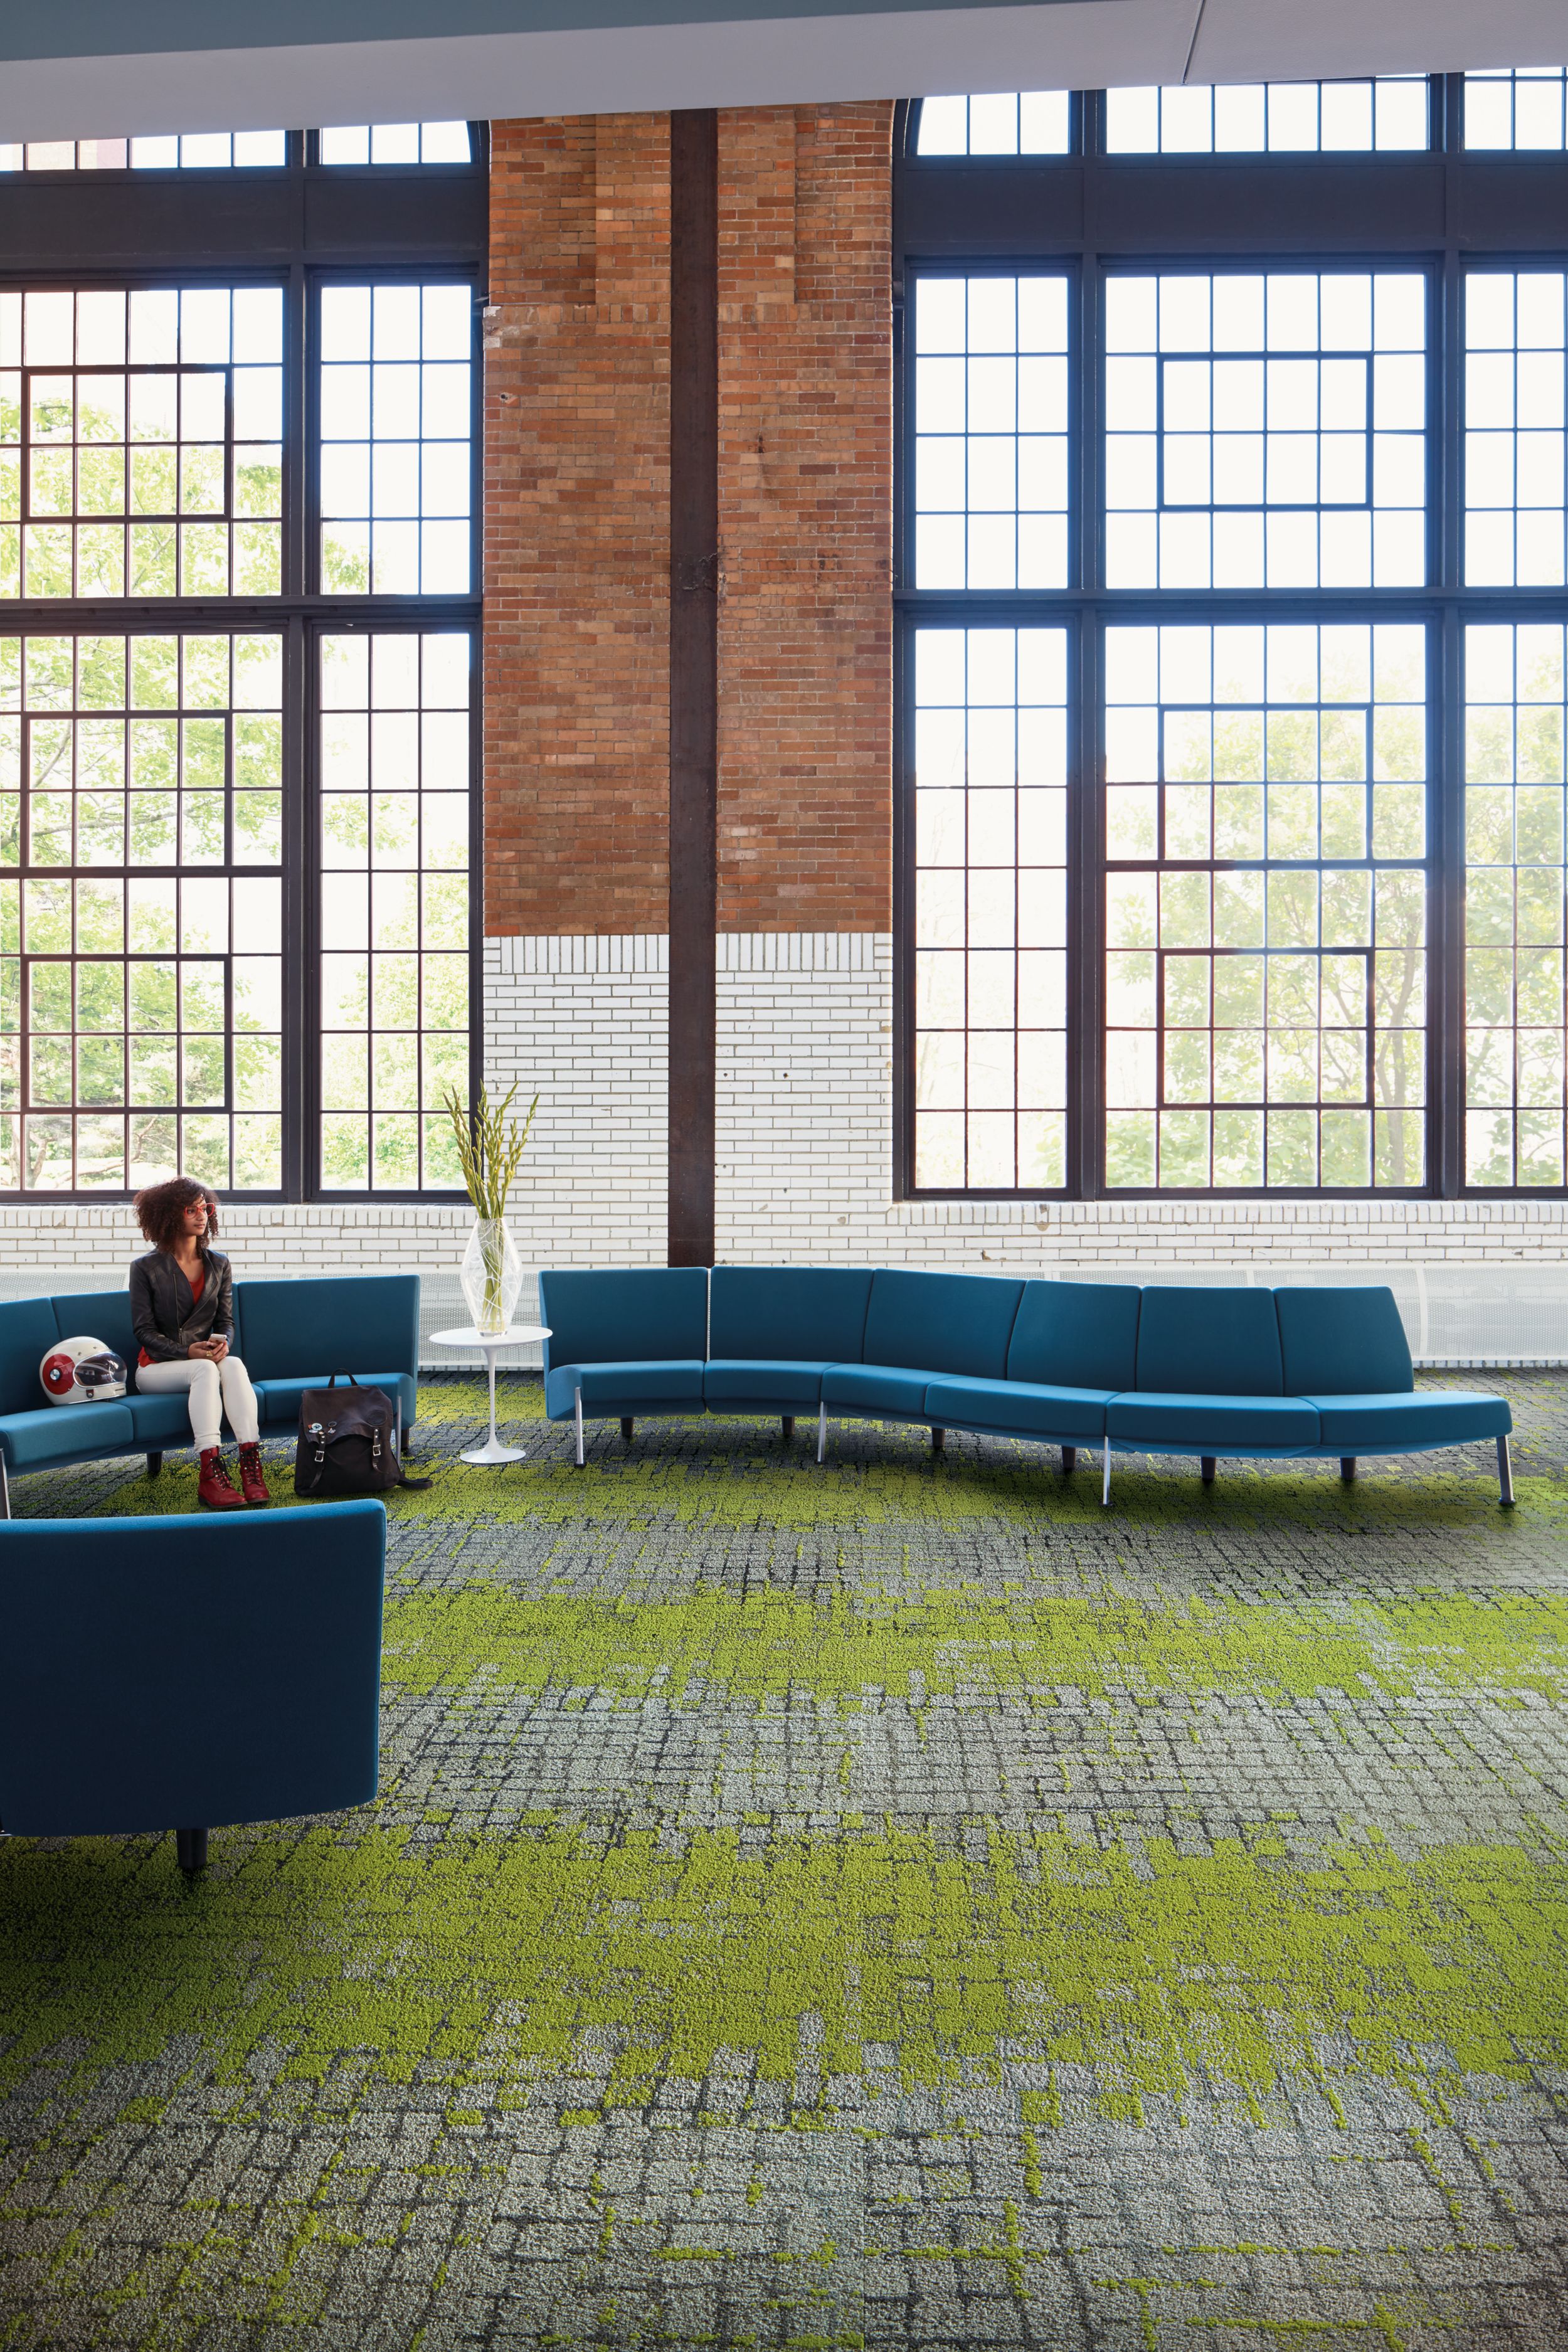 Interface Moss and Moss in Stone carpet tile in seating area with blue couches and women seated número de imagen 1